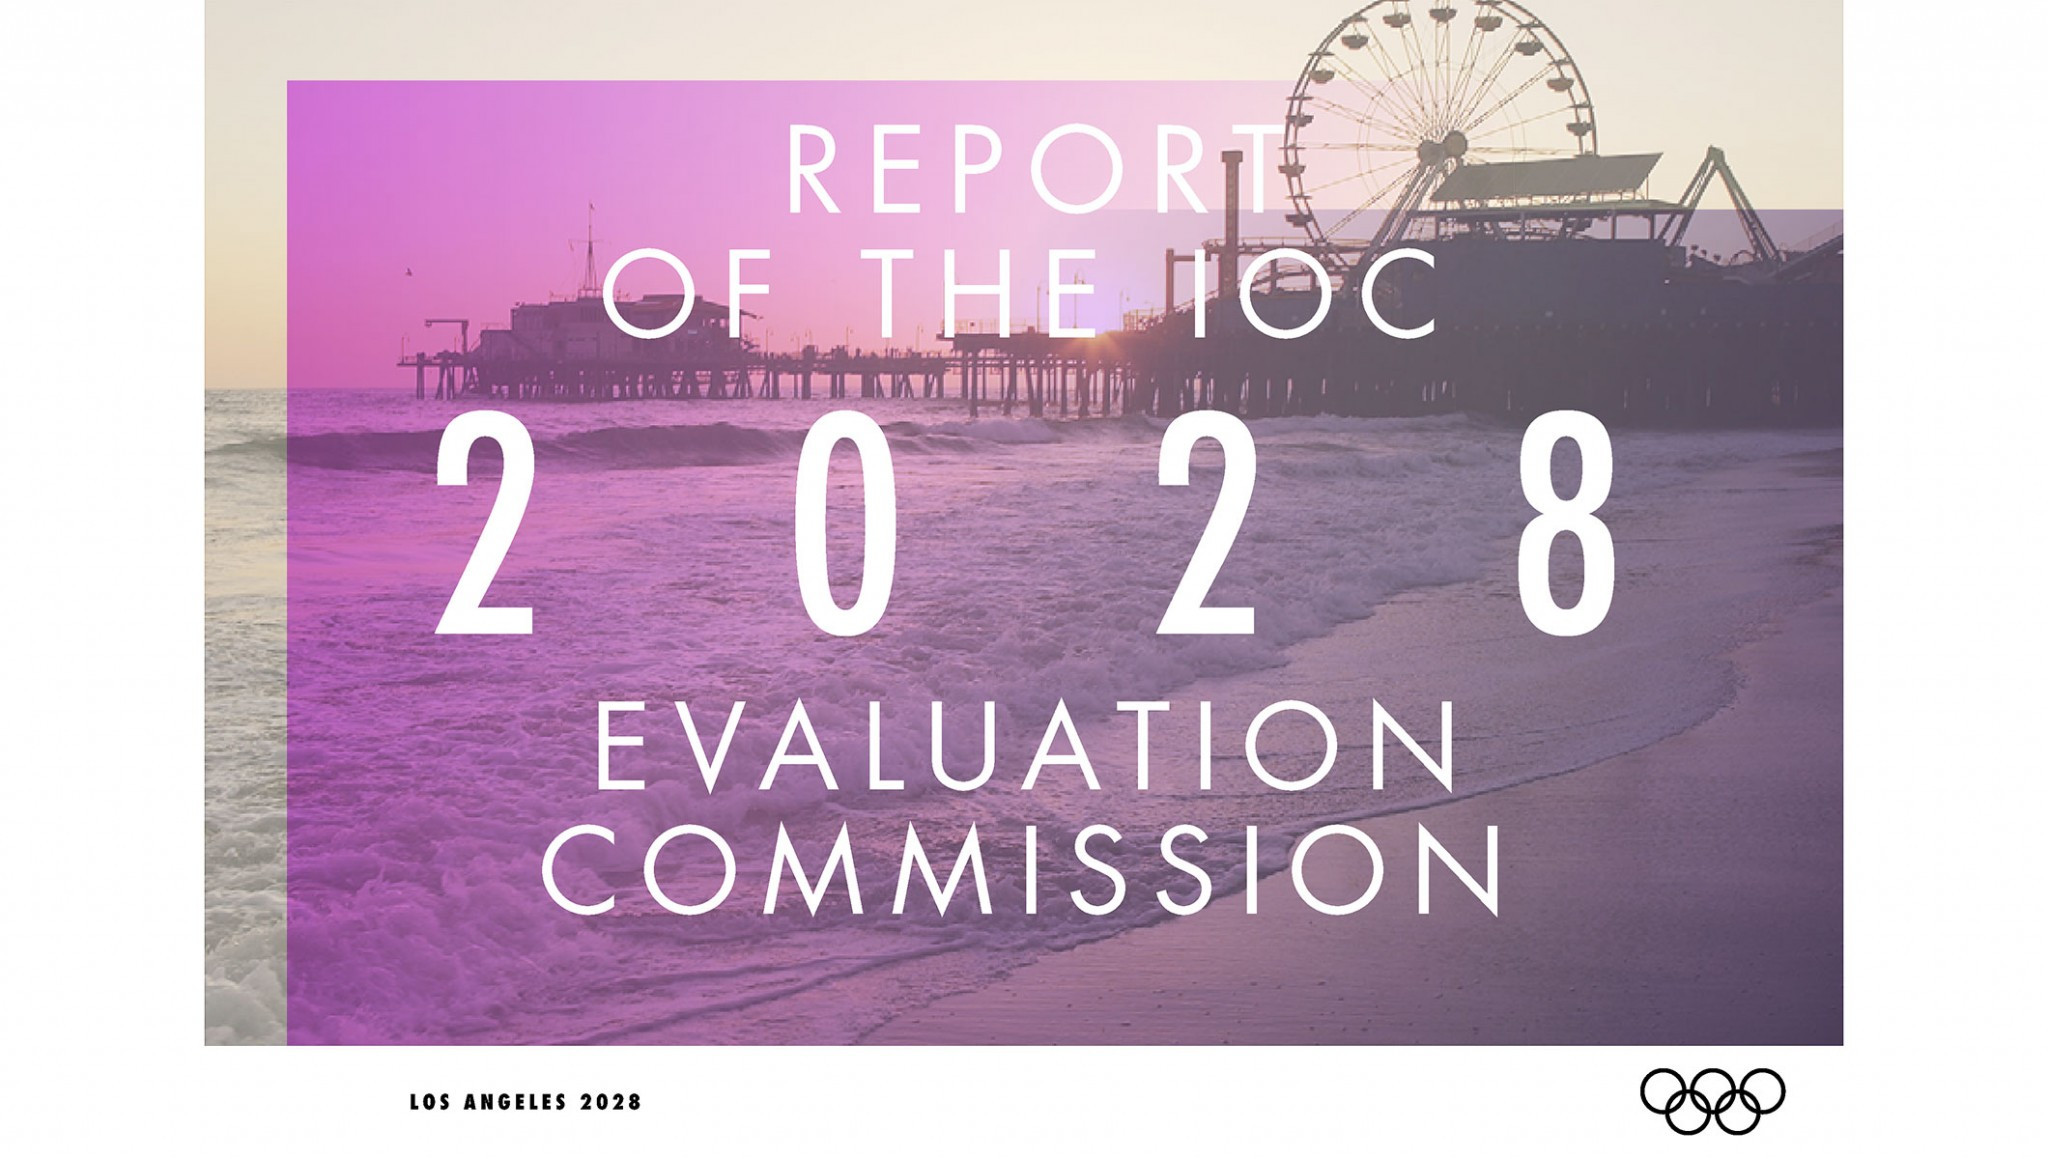 IOC Evaluation Commission confirms Los Angeles 2028 meets Olympic and Paralympic hosting requirements